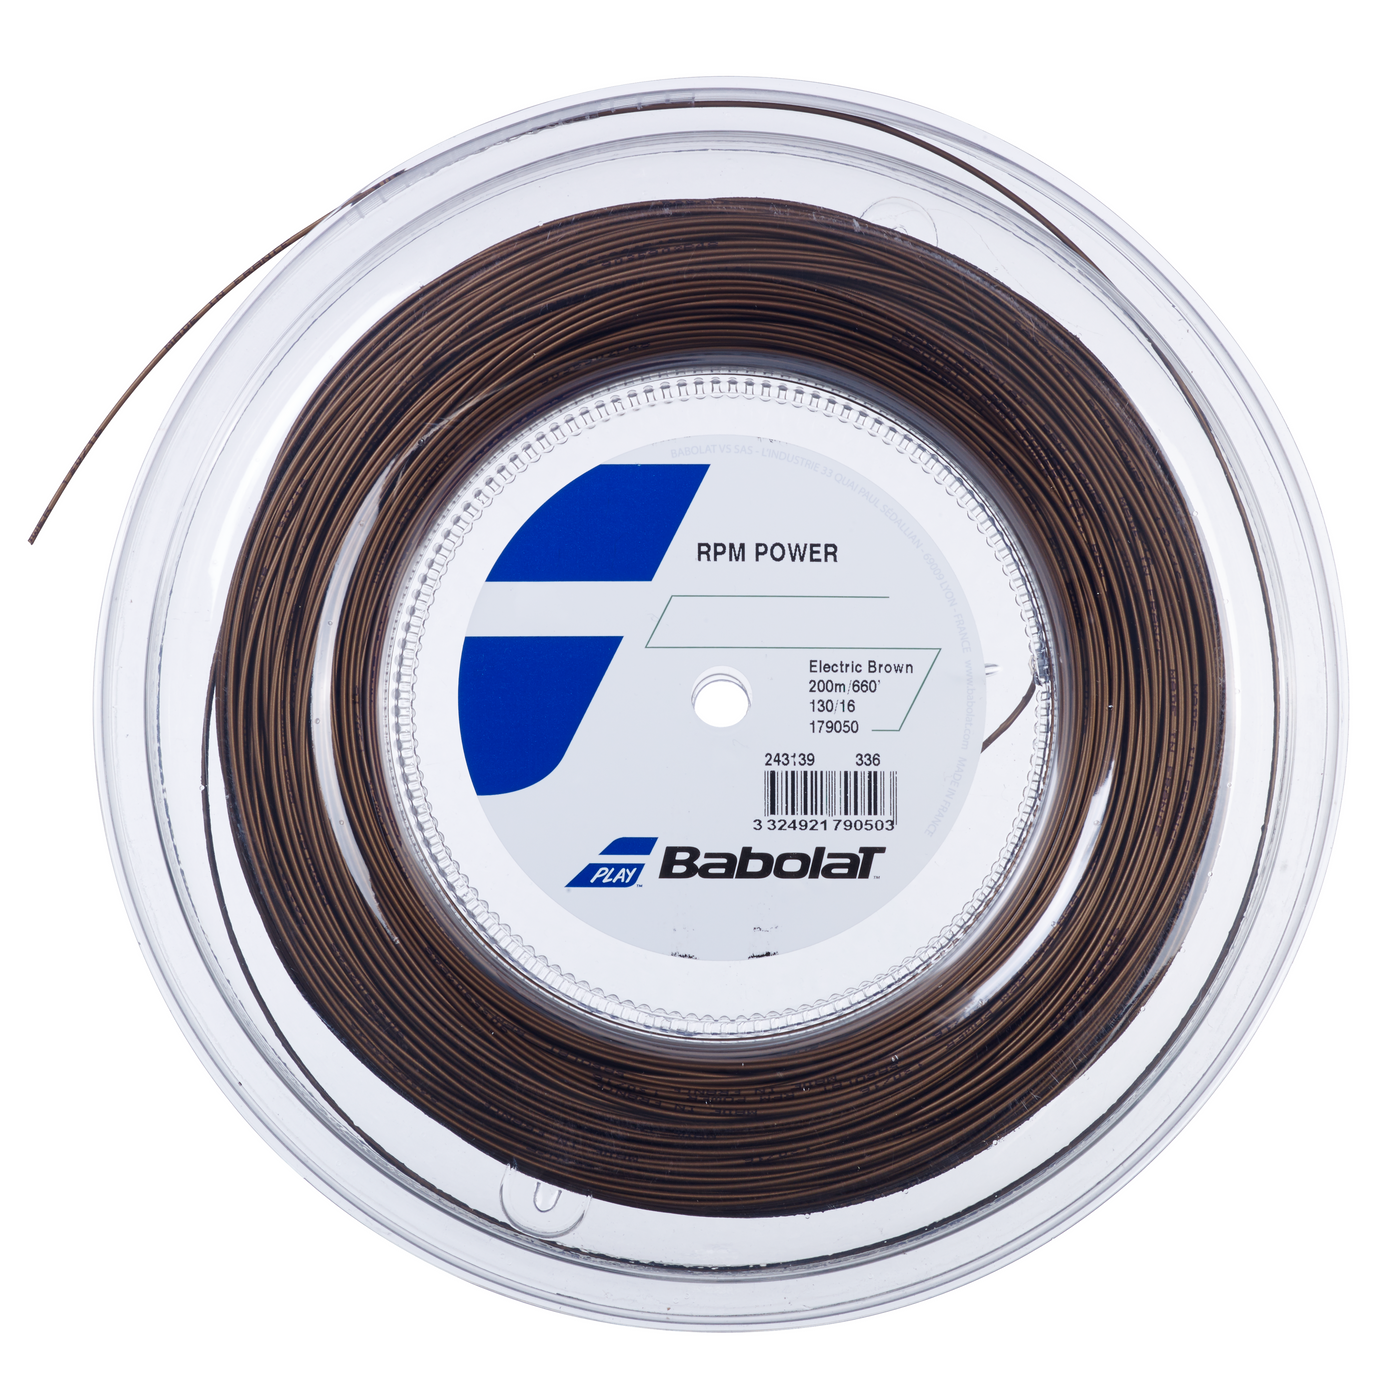 BABOLAT RPM POWER 130 200M REEL - ELECTRIC BROWN